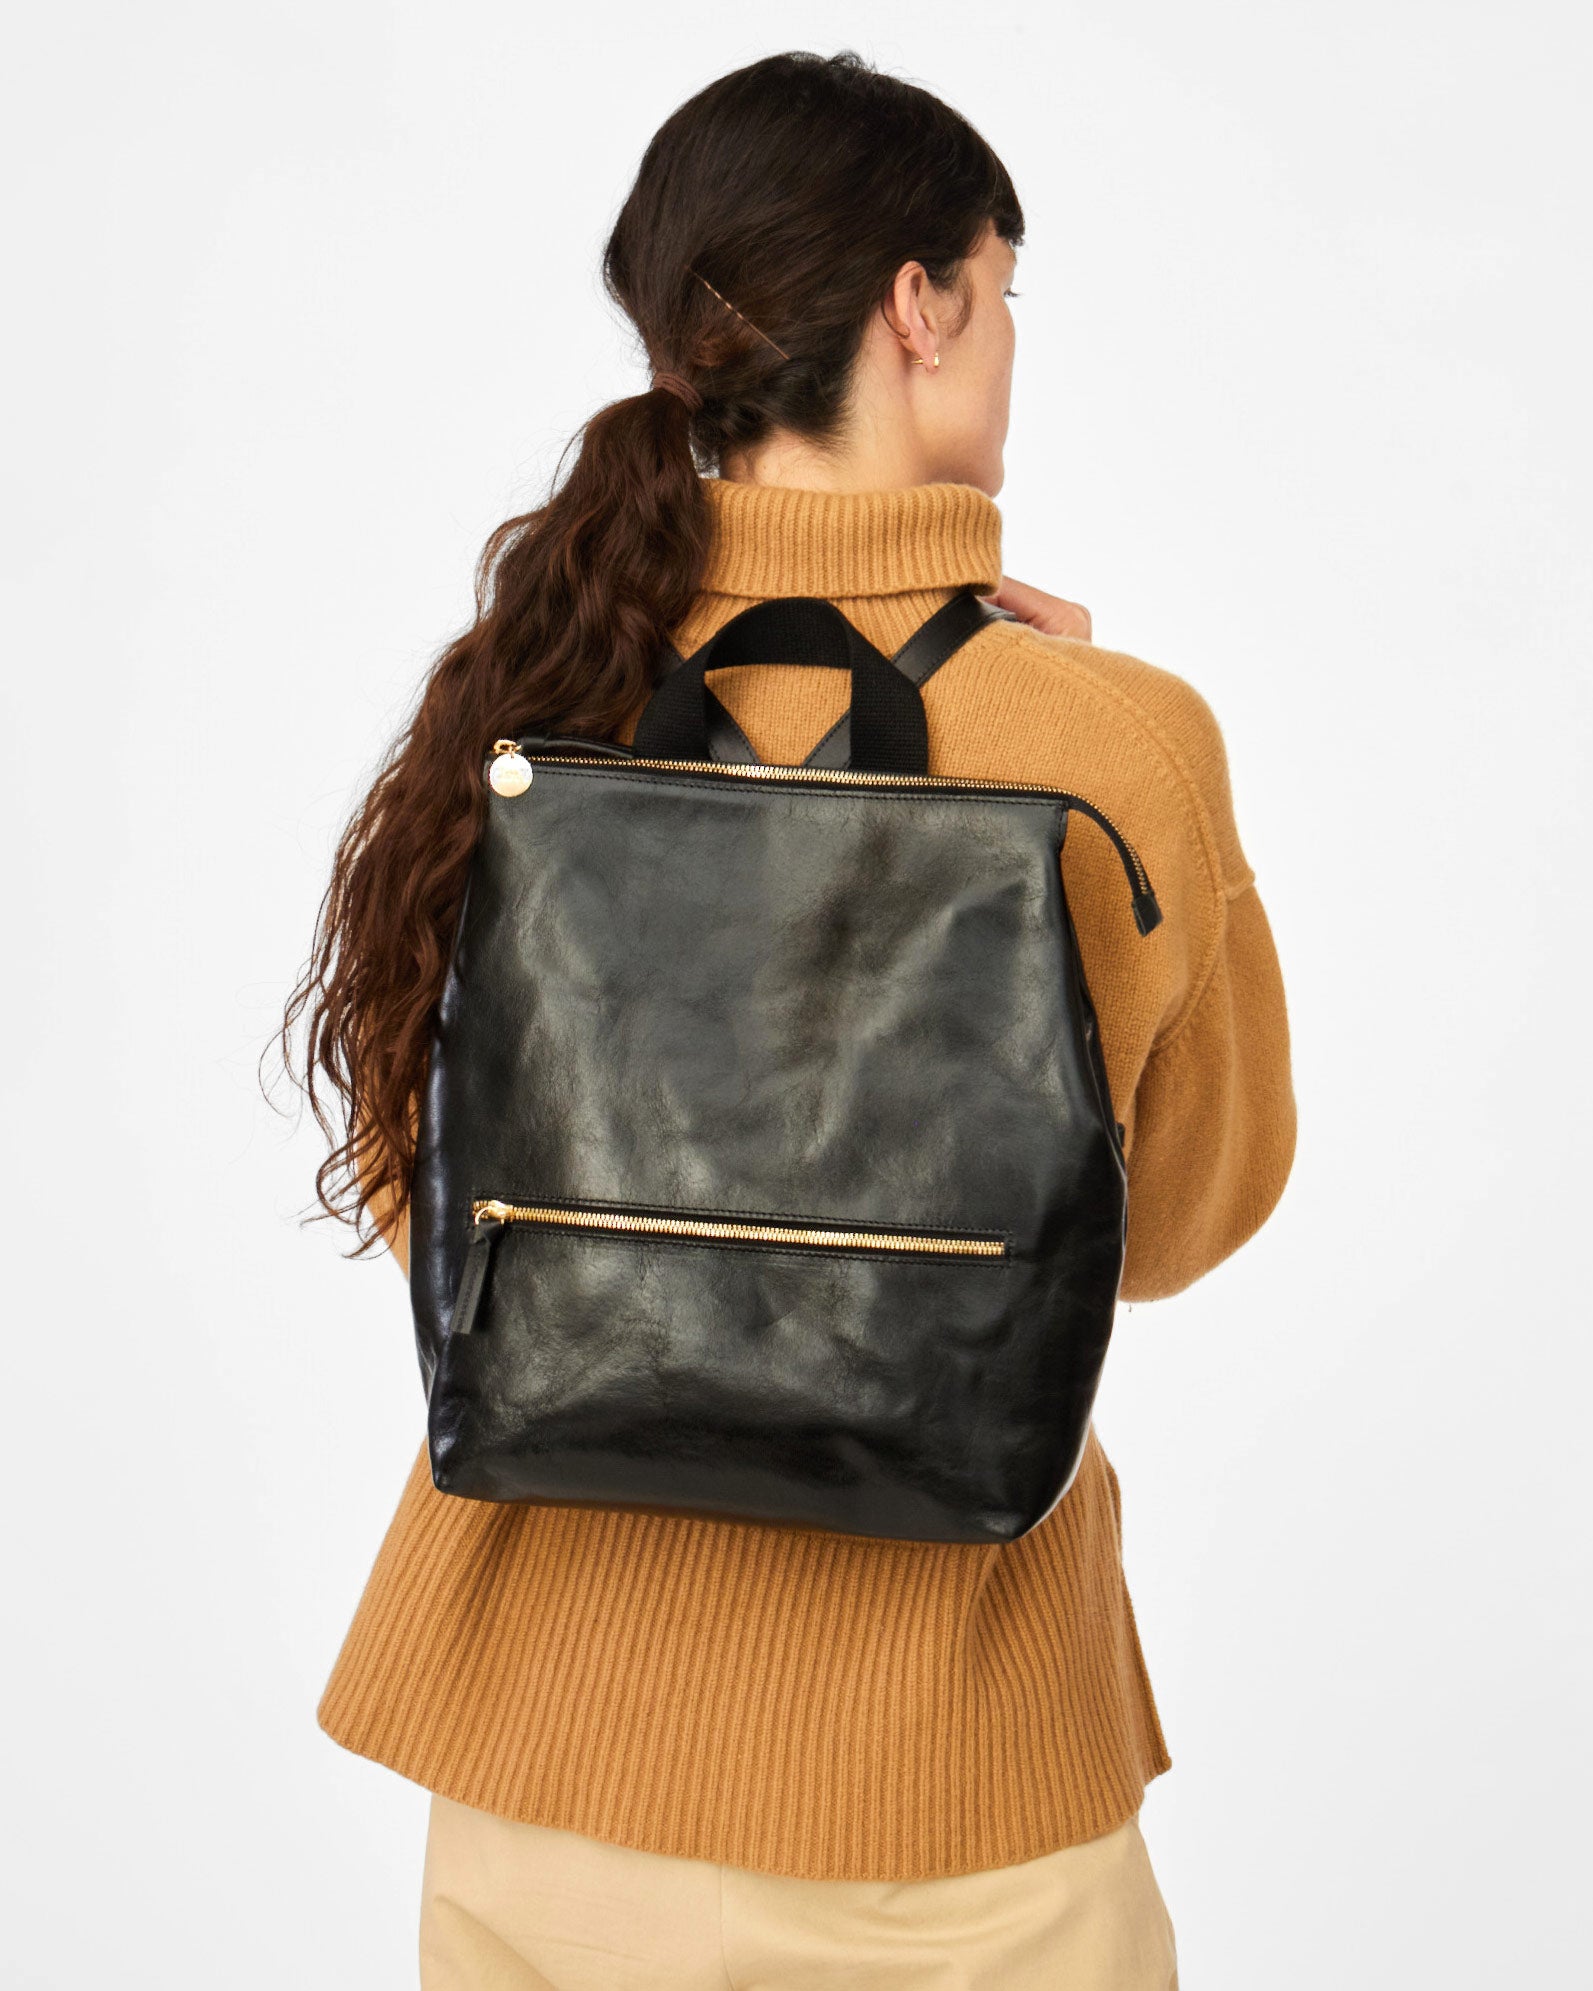 Clare V. Remi Leather Backpack in Black Rustic